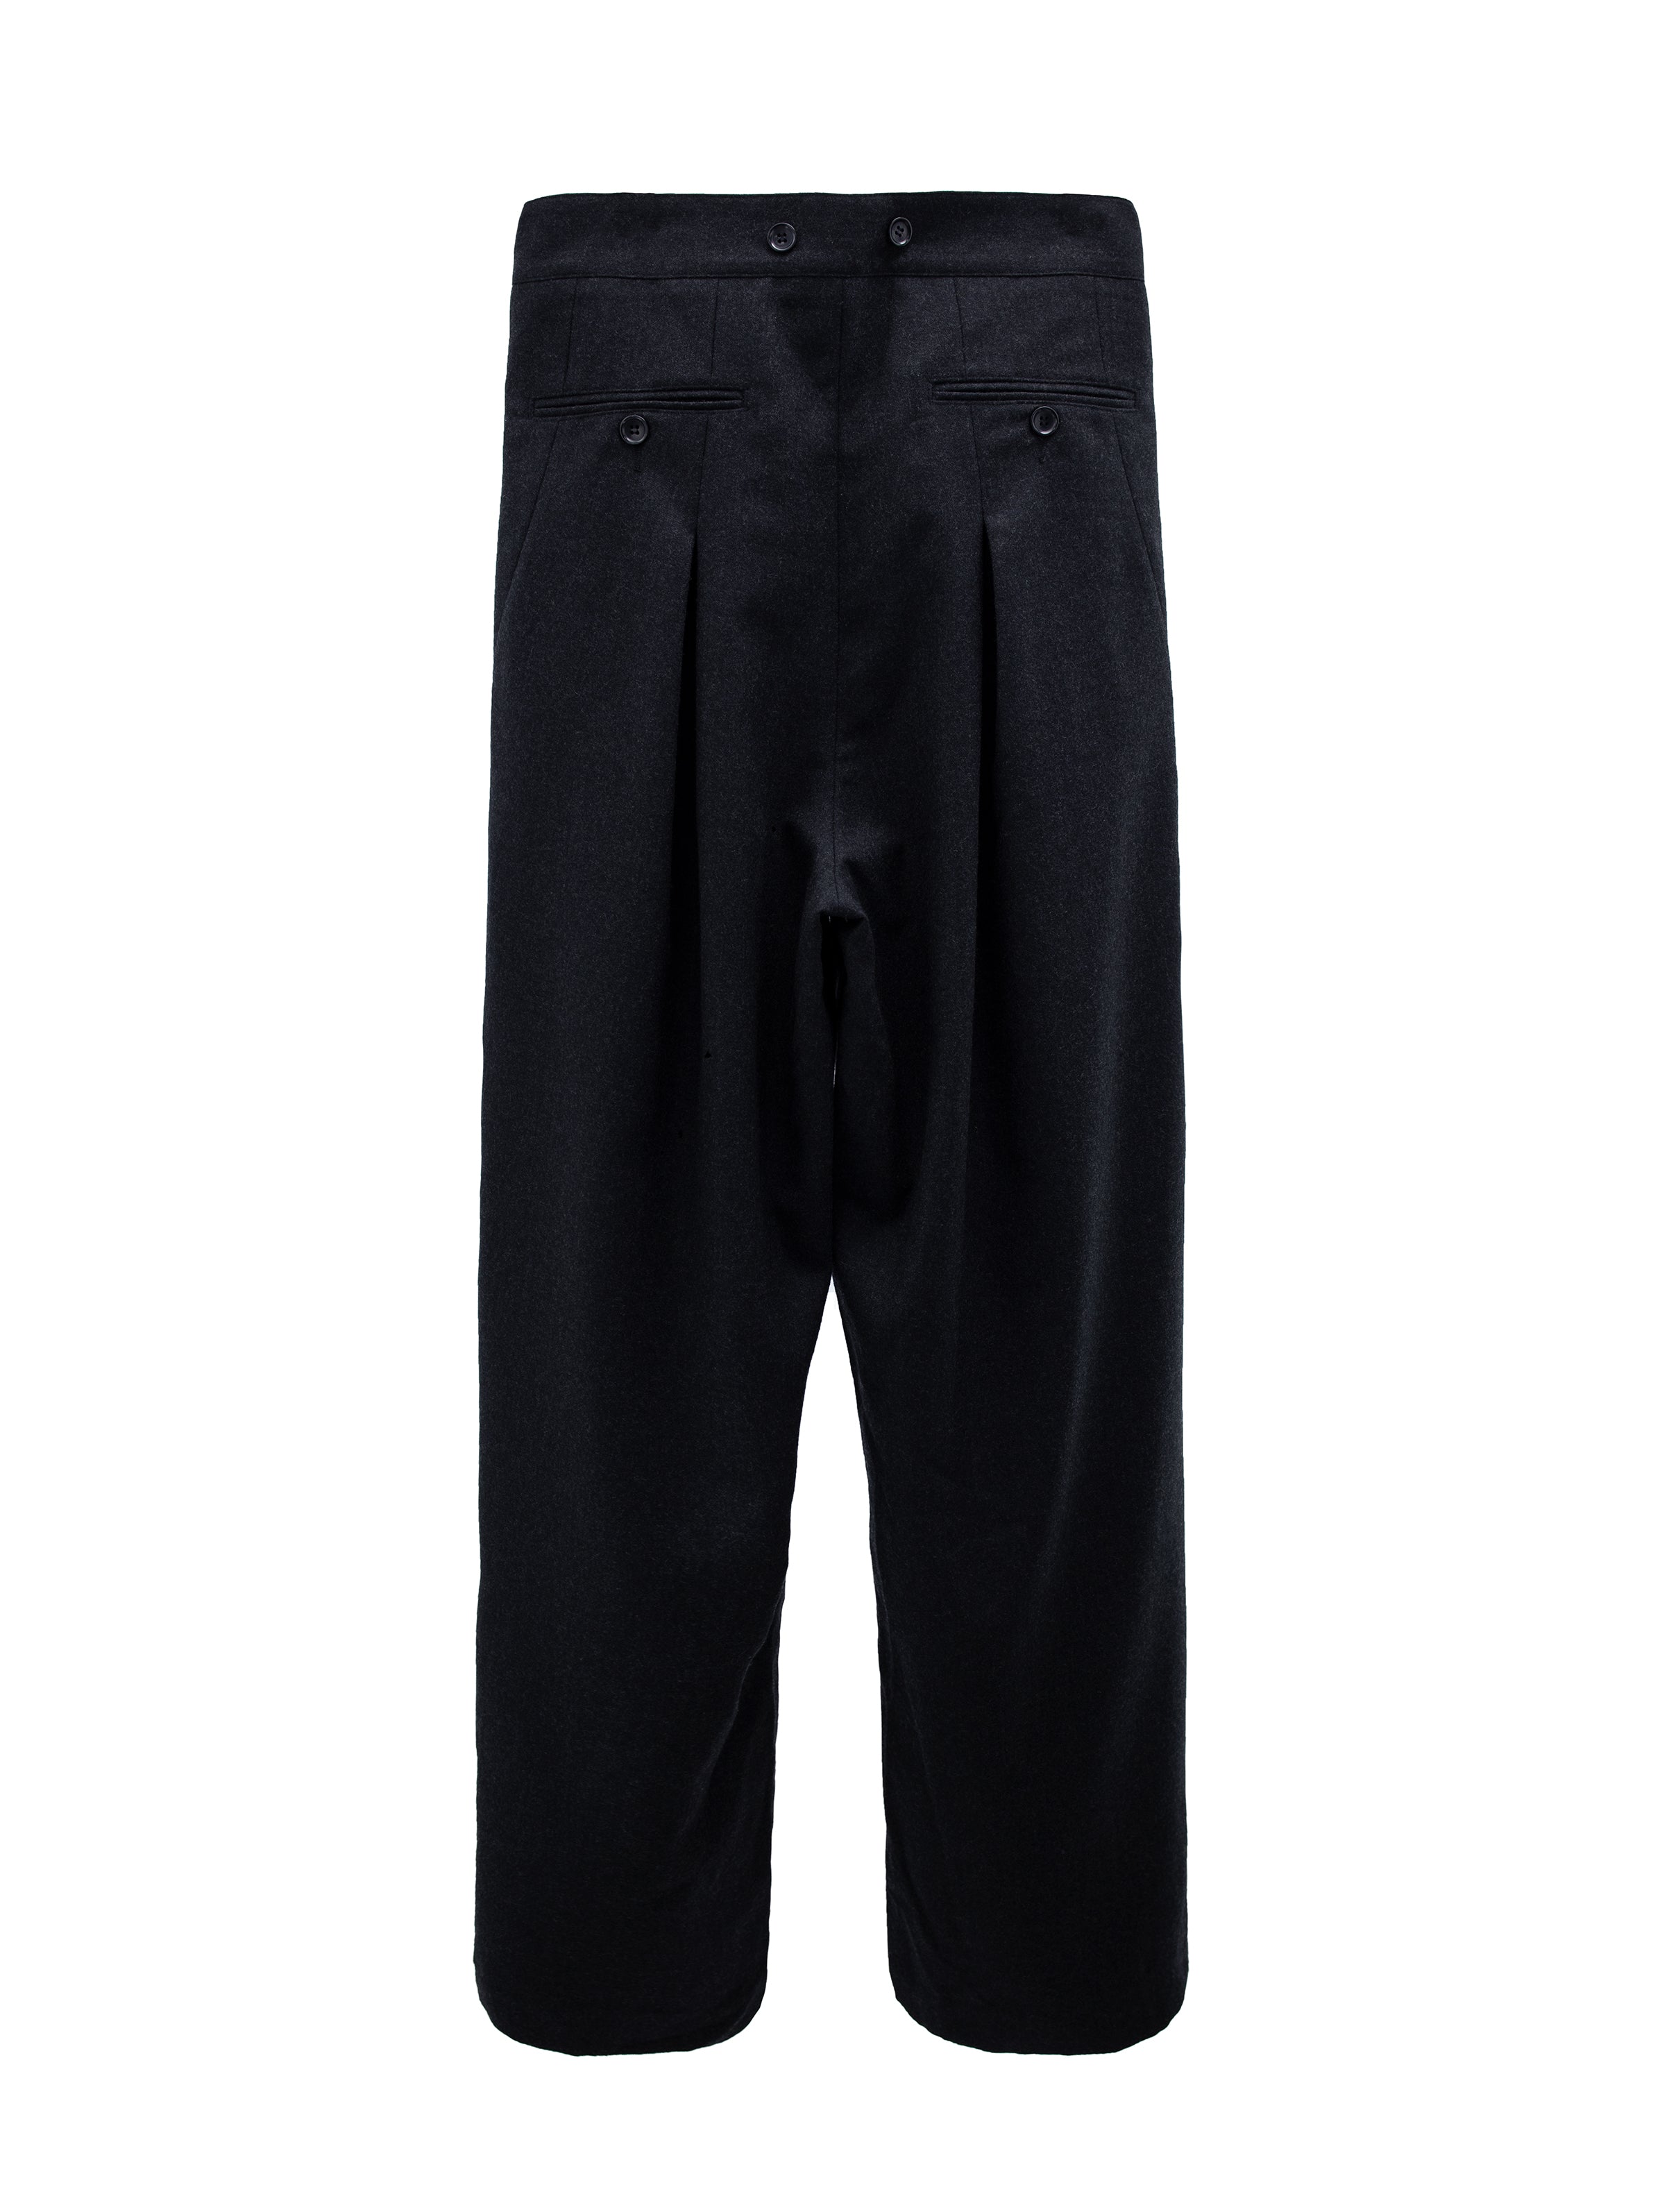 DARK GREY PLEATED SUIT TROUSERS